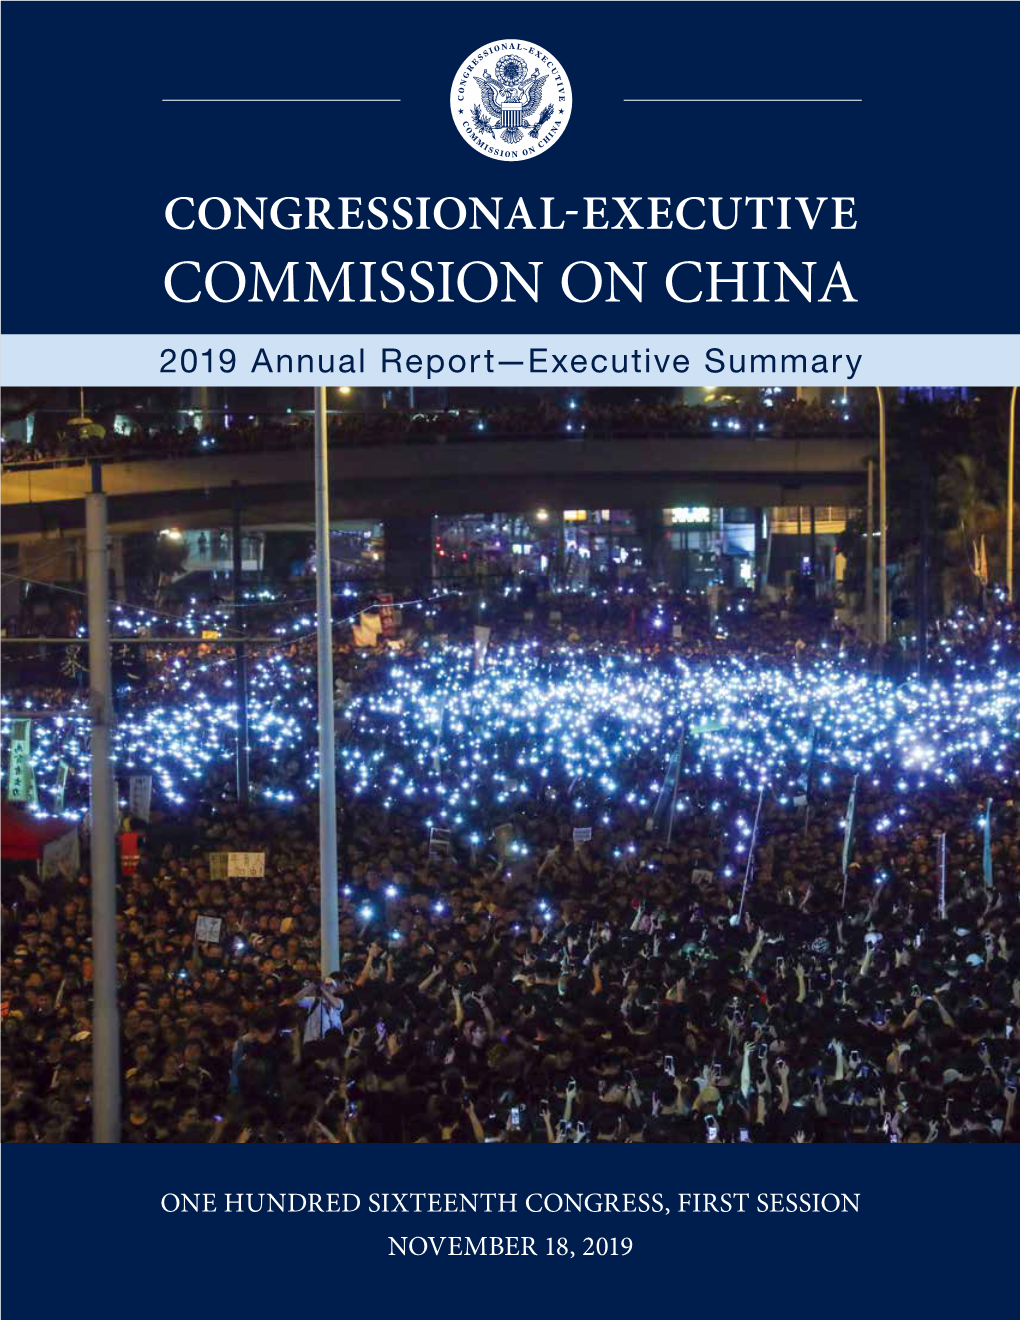 CONGRESSIONAL-EXECUTIVE COMMISSION on CHINA 2019 Annual Report—Executive Summary